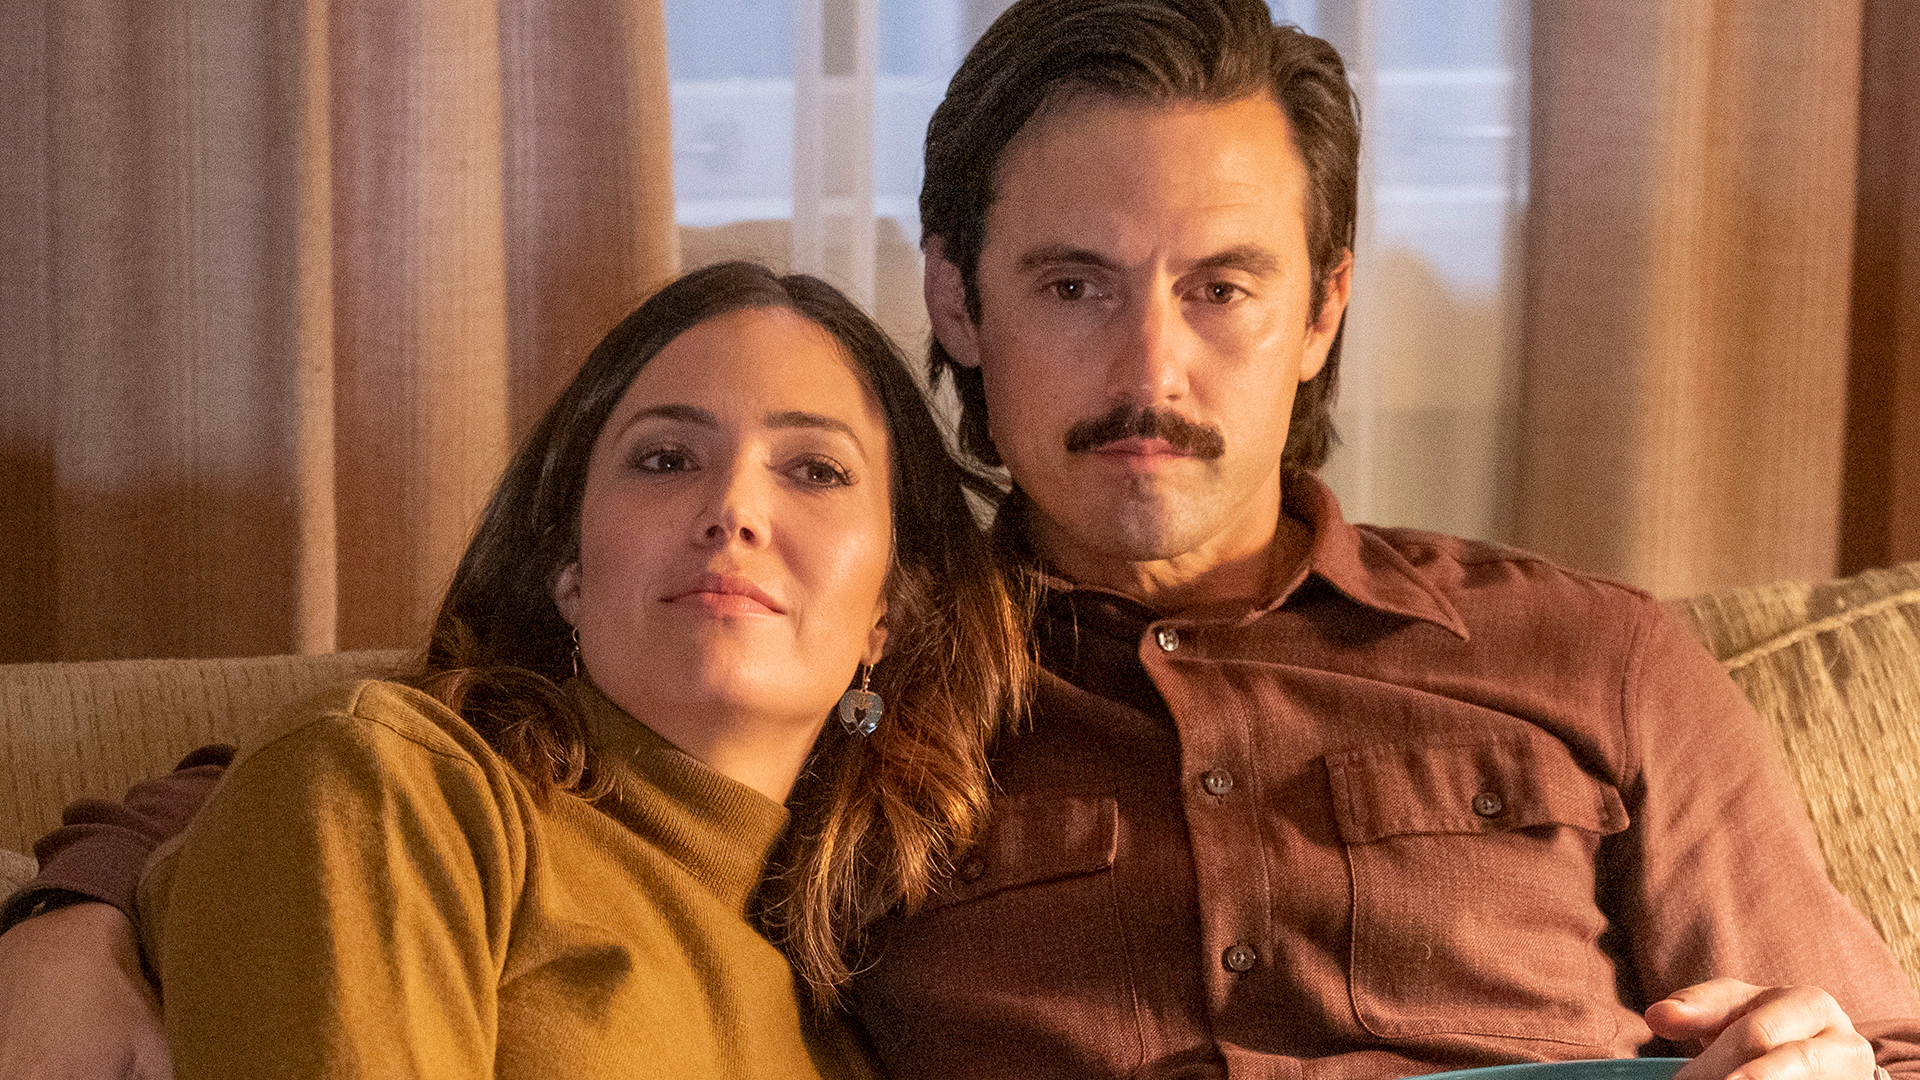 Mandy Moore as Rebecca, Milo Ventimiglia as Jack on 'This Is Us'